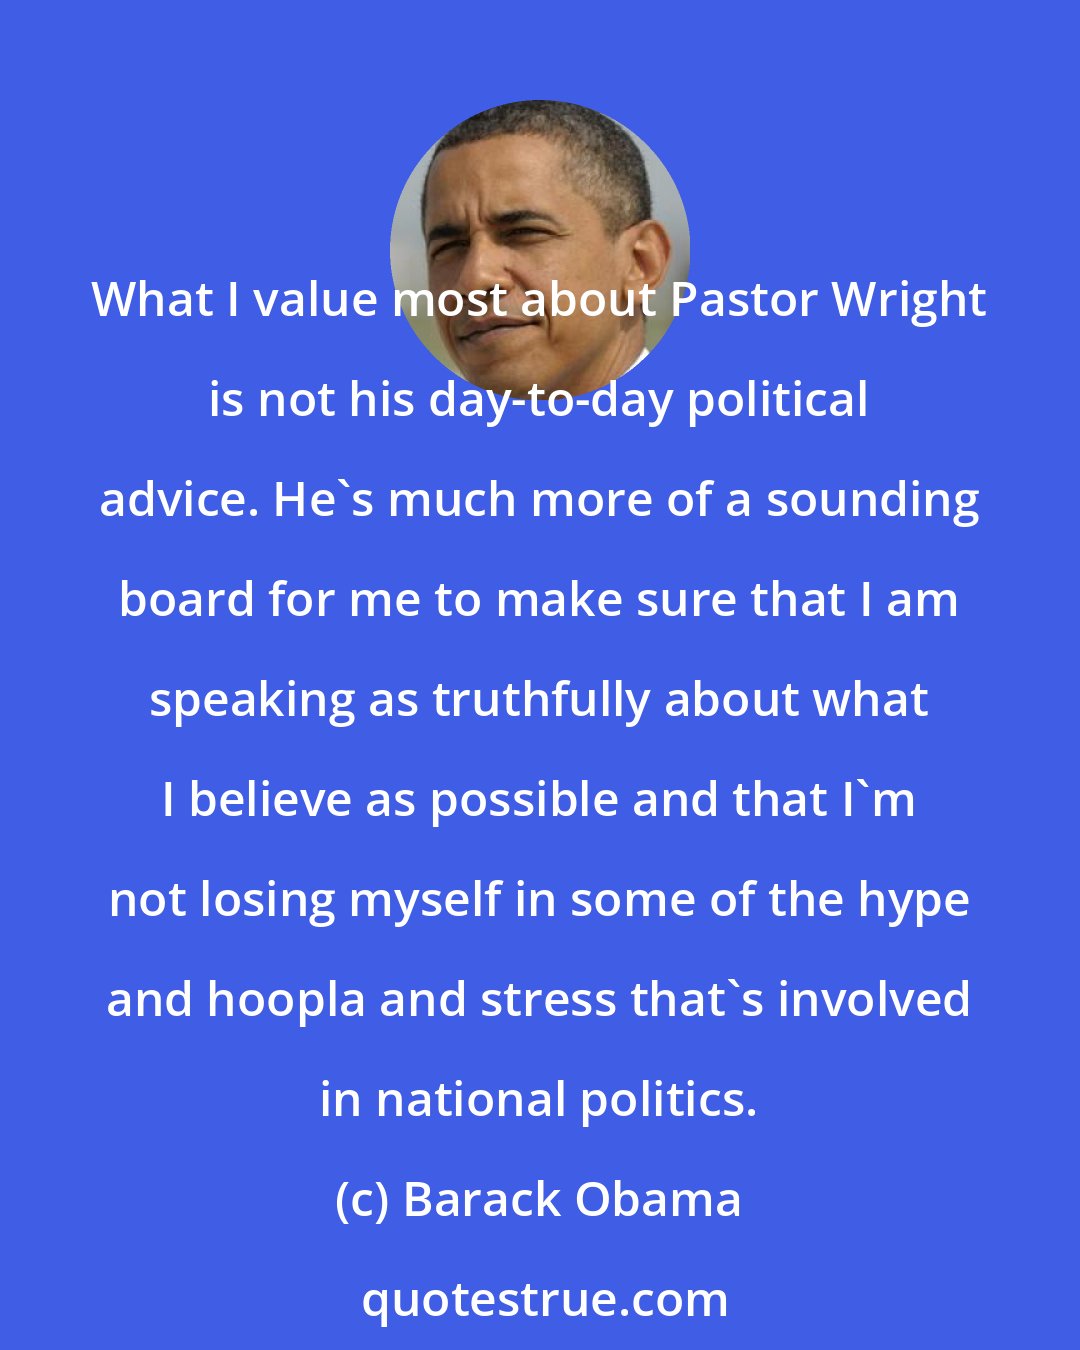 Barack Obama: What I value most about Pastor Wright is not his day-to-day political advice. He's much more of a sounding board for me to make sure that I am speaking as truthfully about what I believe as possible and that I'm not losing myself in some of the hype and hoopla and stress that's involved in national politics.